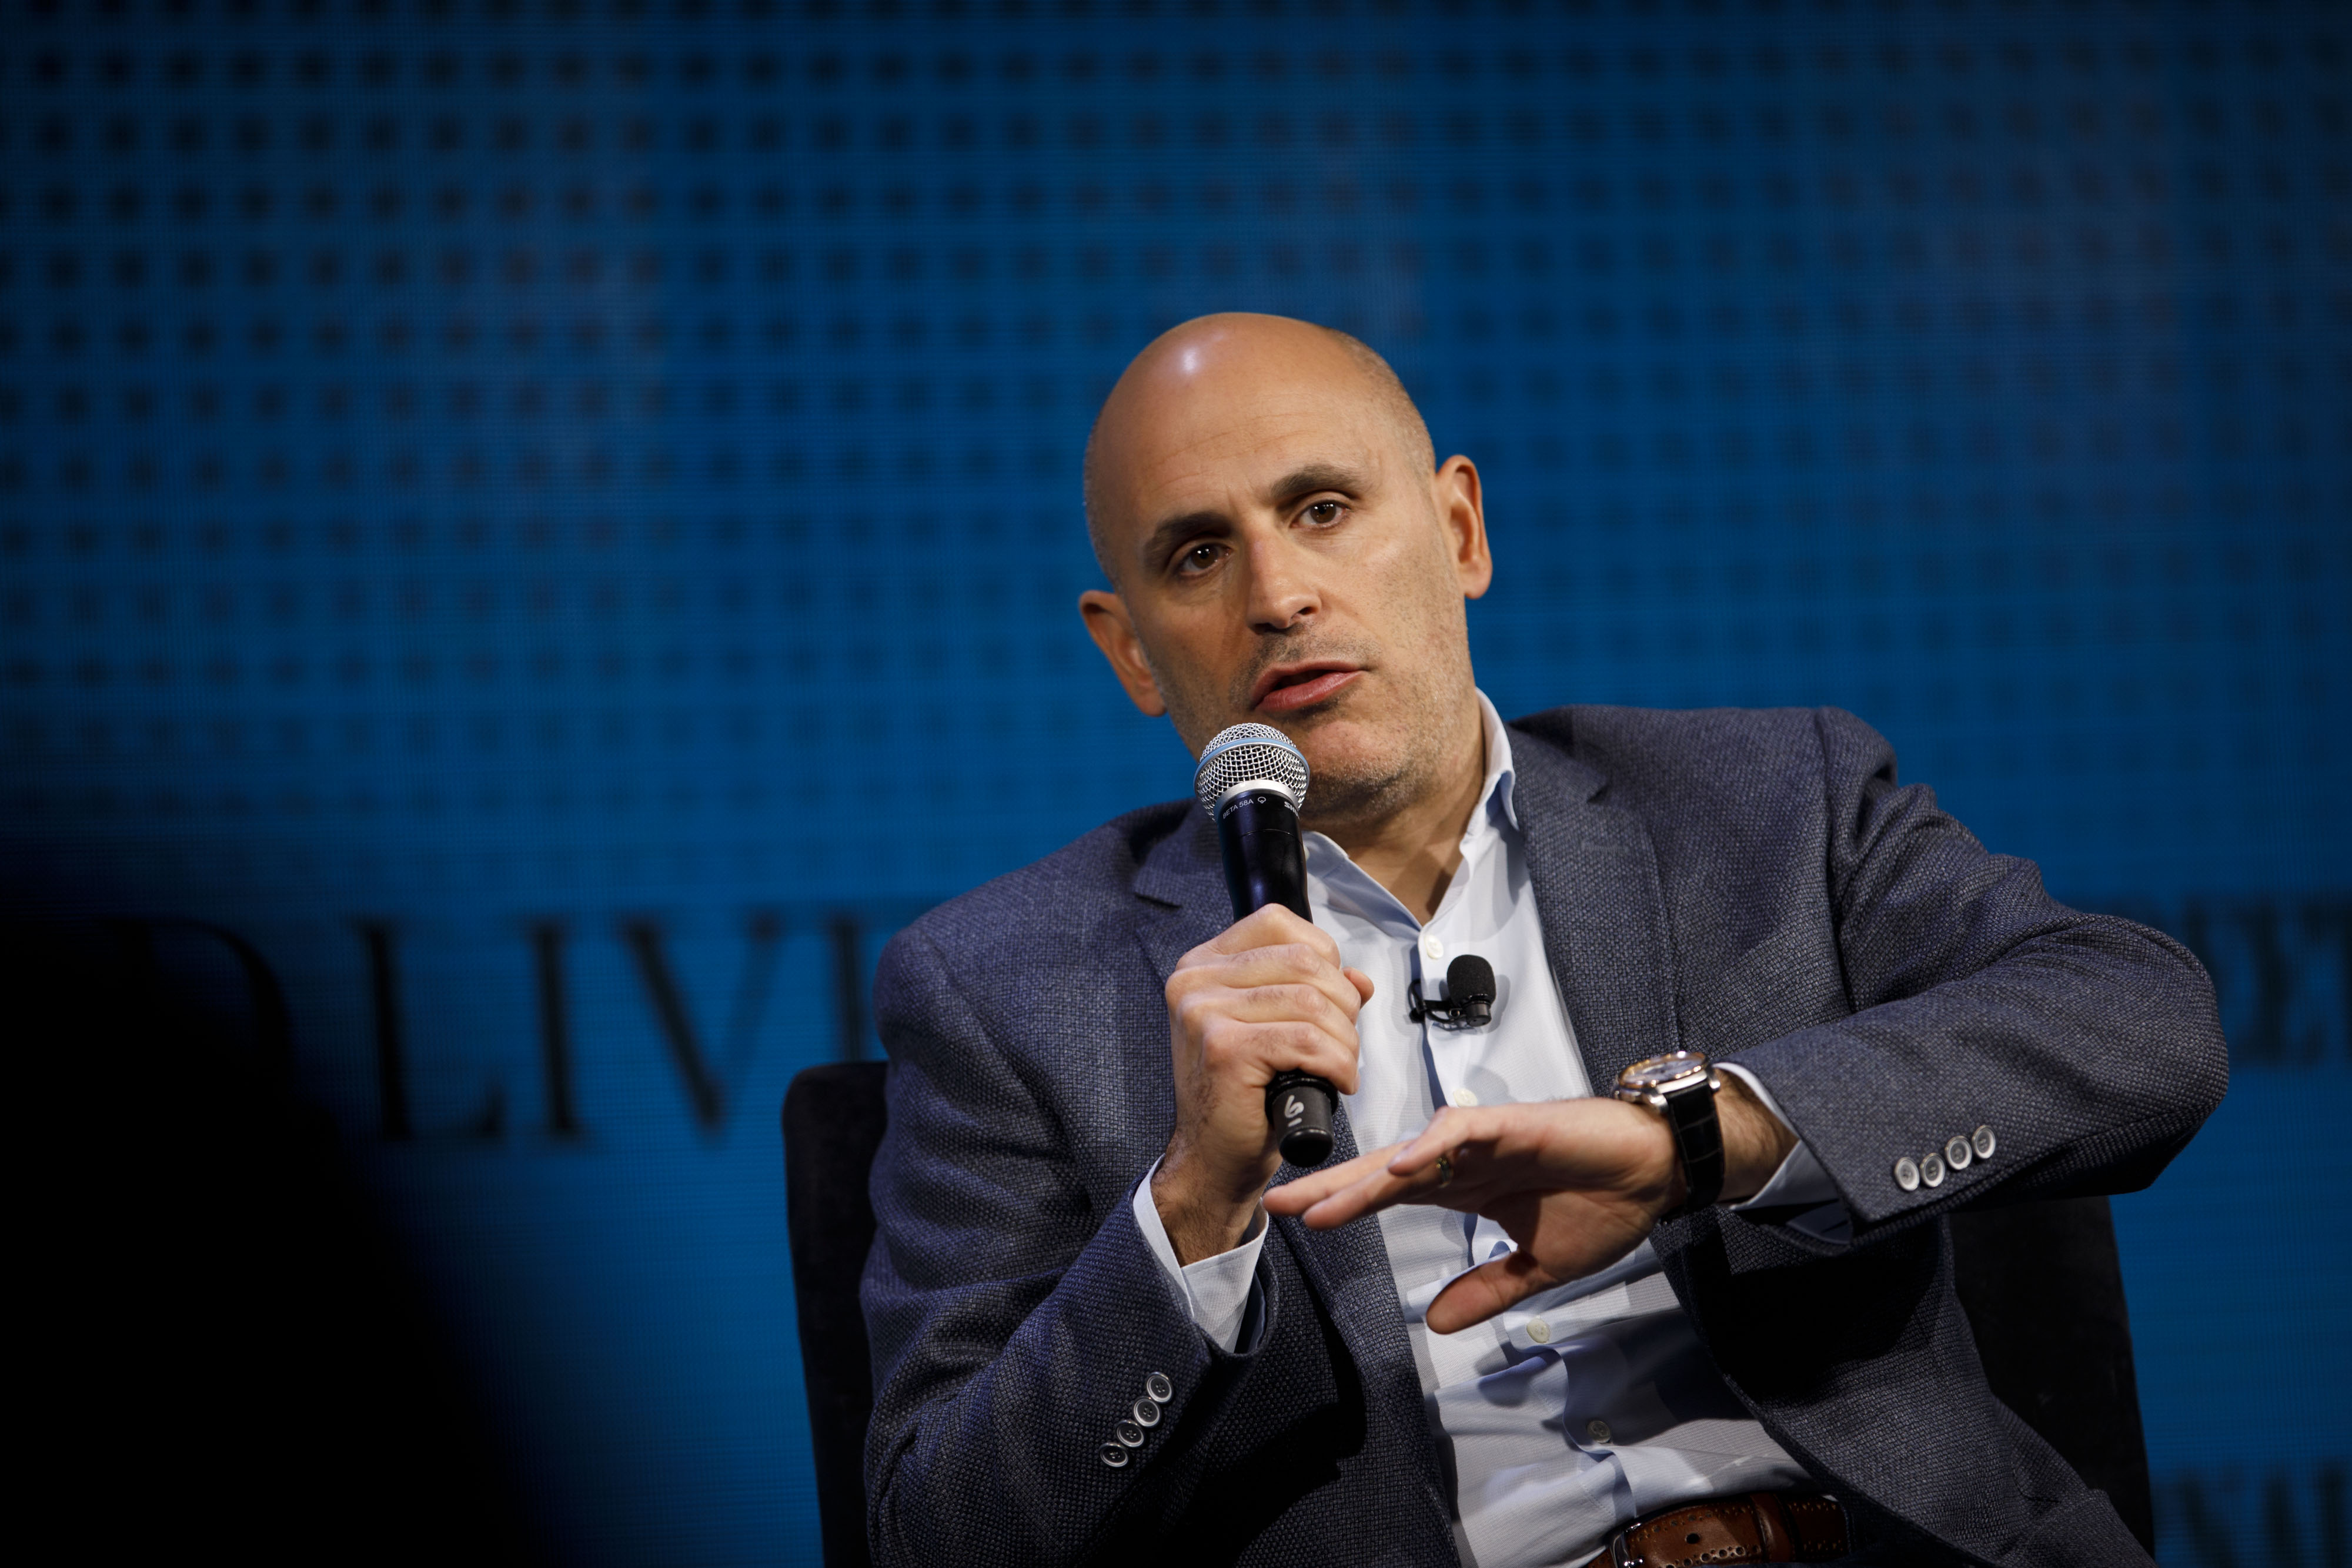 Walmart (WMT) Digital Chief Marc Lore to Step Down at End of Month